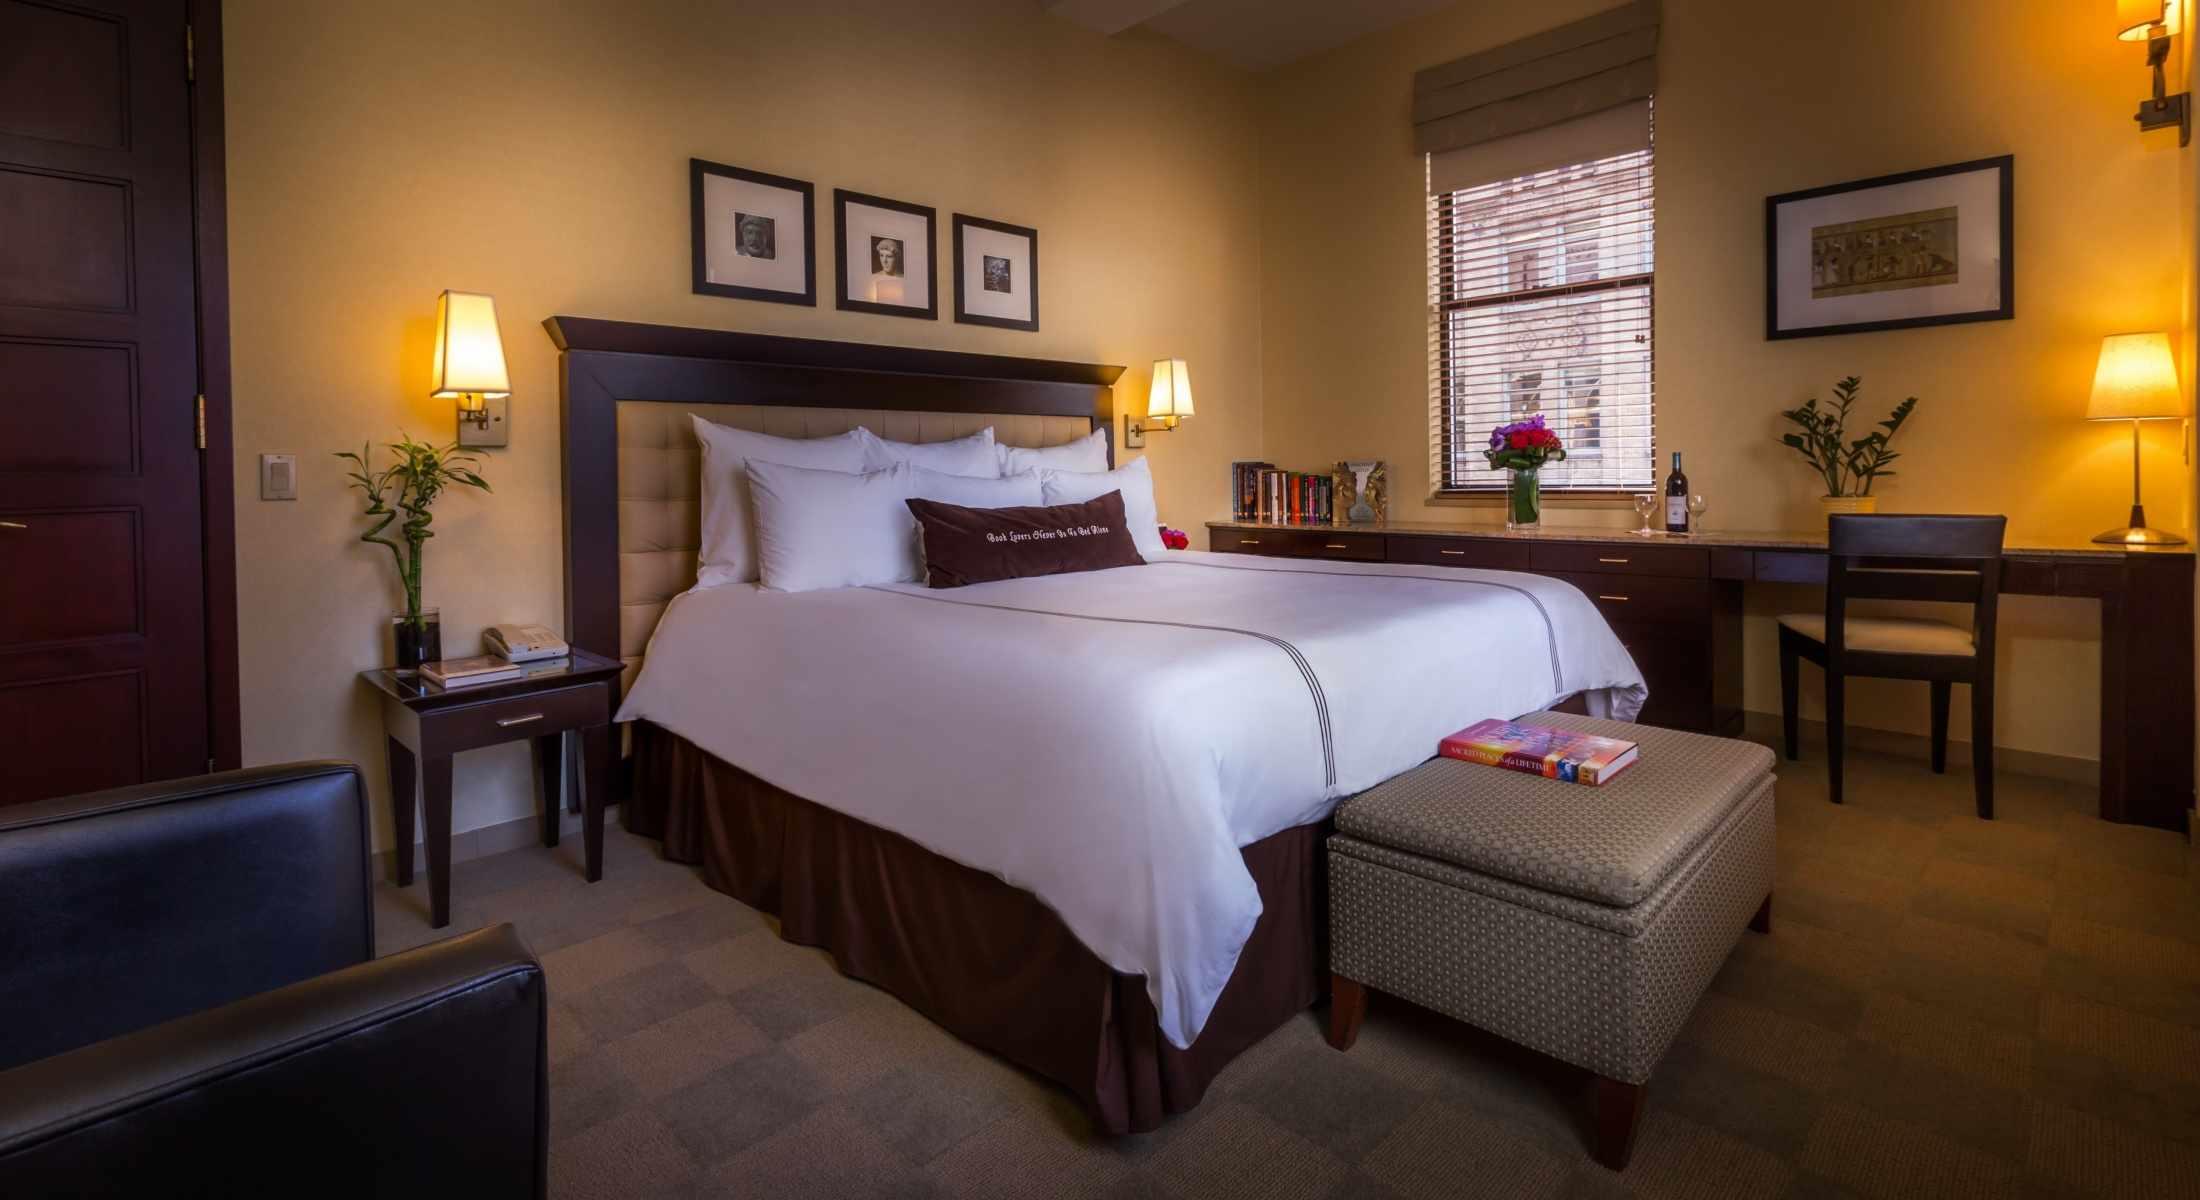 The Mythology Room features a King Bed and a large desk perfect for couples or a long stay.